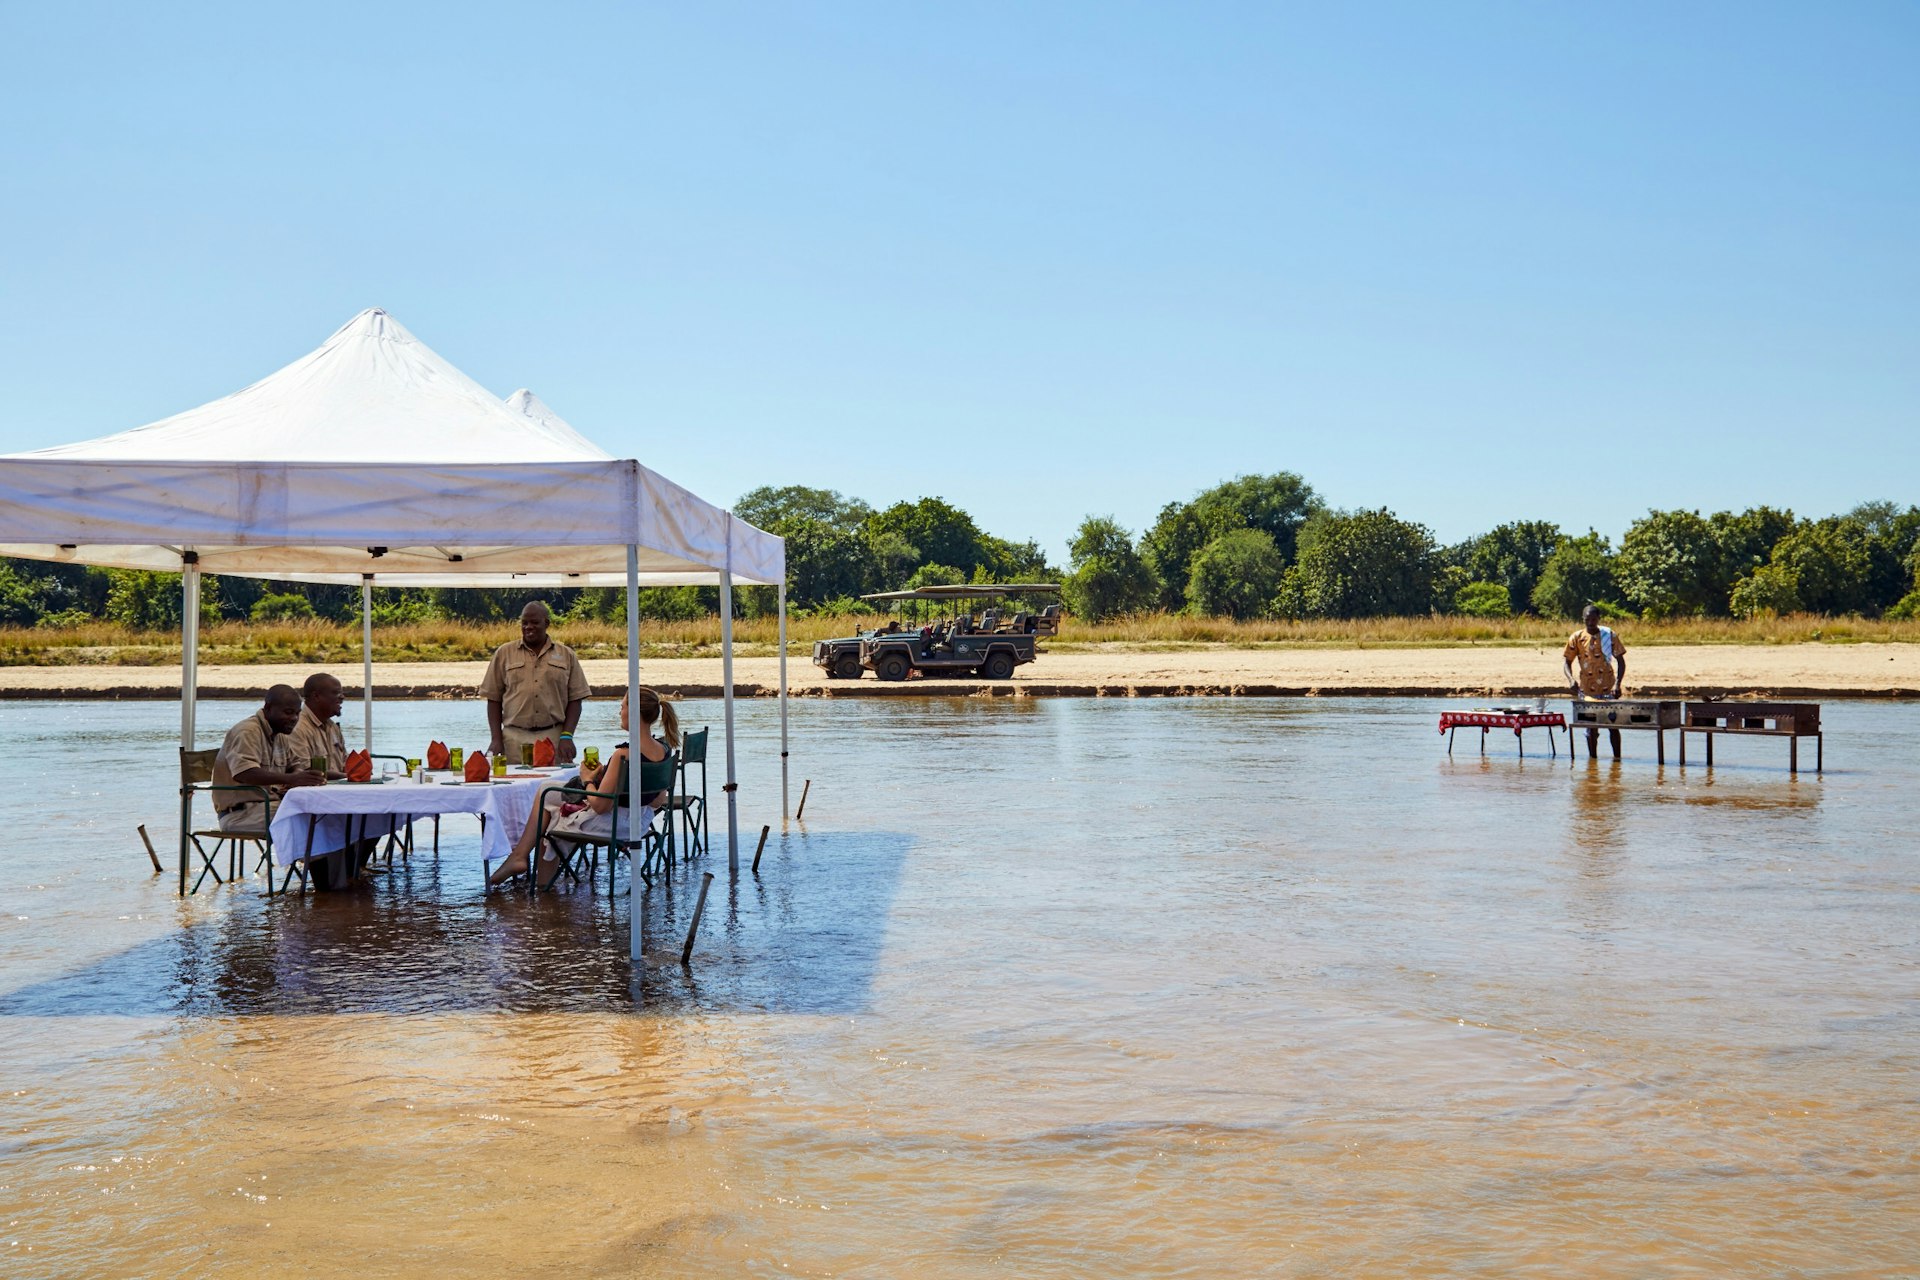 Al fresco dining on Kapamba River at the Kapamba Bushcamp, part of The Bushcamp Company in South Luangwa National Park